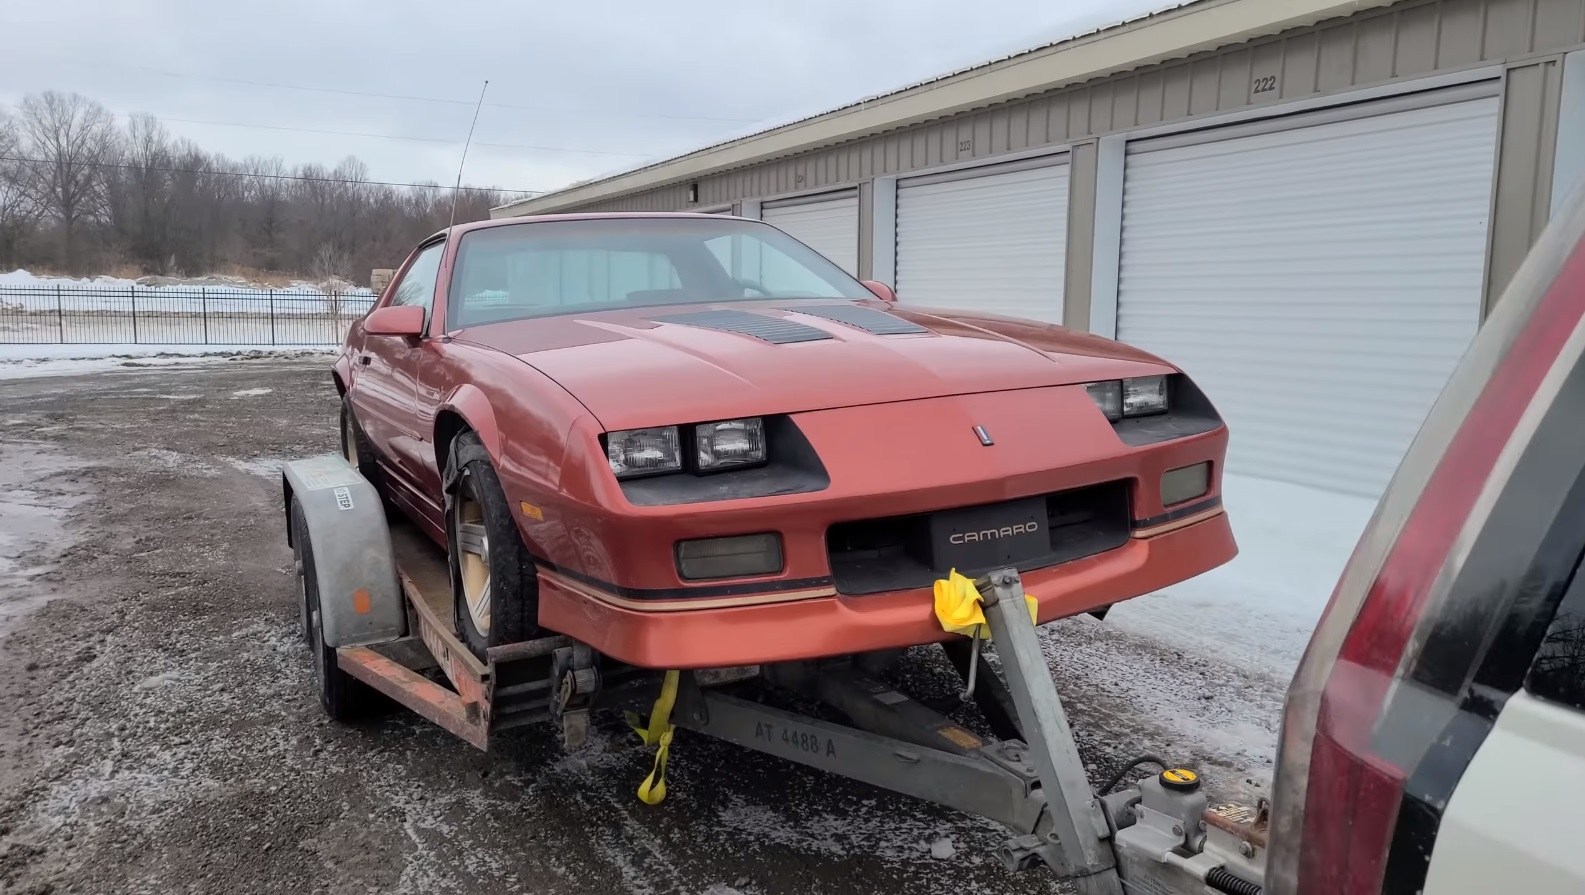 After Being Abandoned 27 Years Ago, This 1988 Camaro IROC-Z Hides Some  Surprises - autoevolution